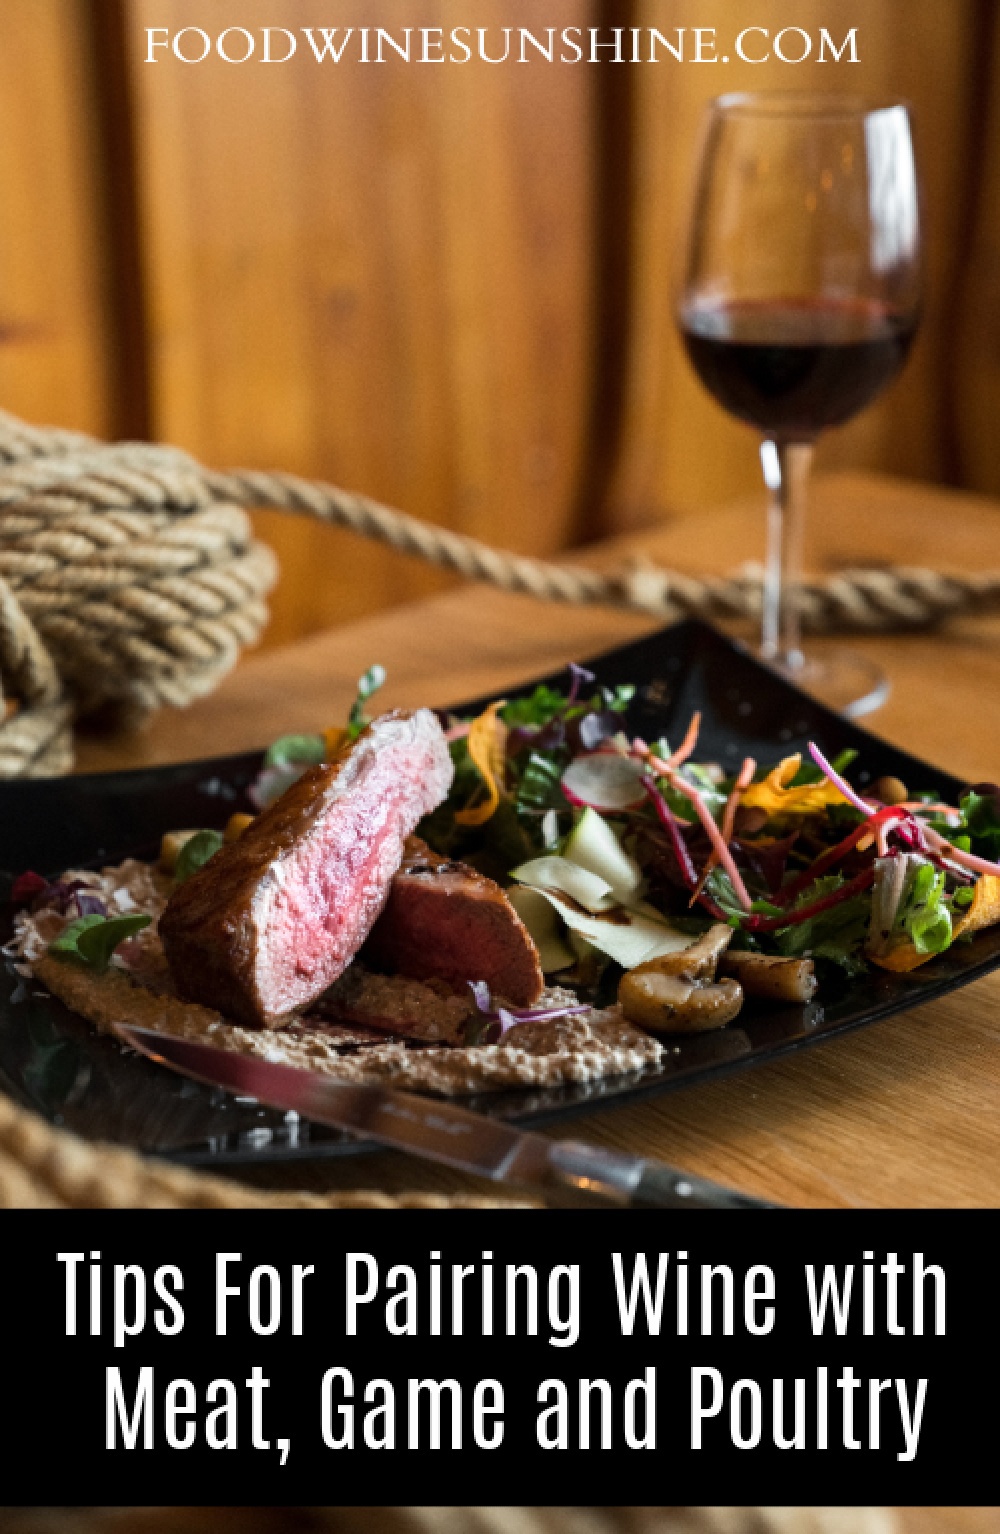 Pairing Wine with Meat, Game and Poultry